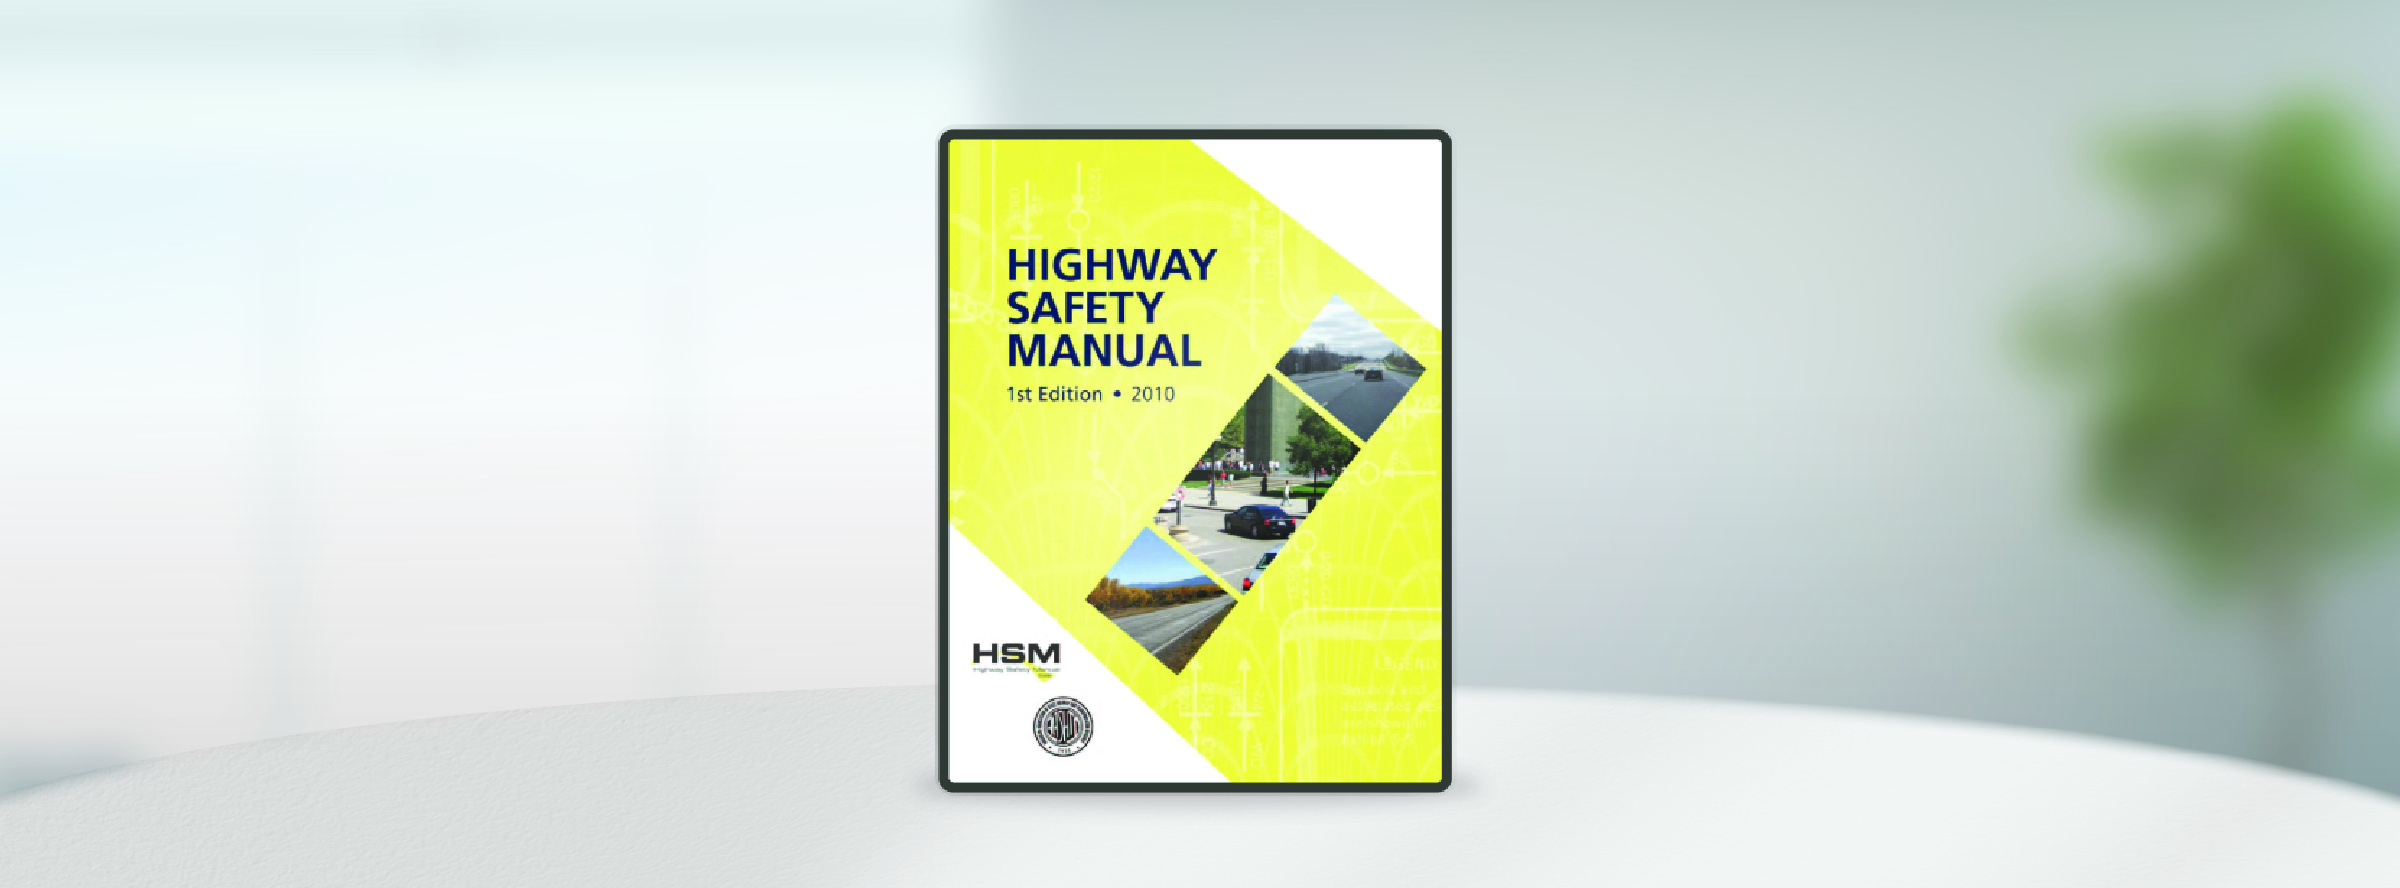 Highway Safety Manual 2